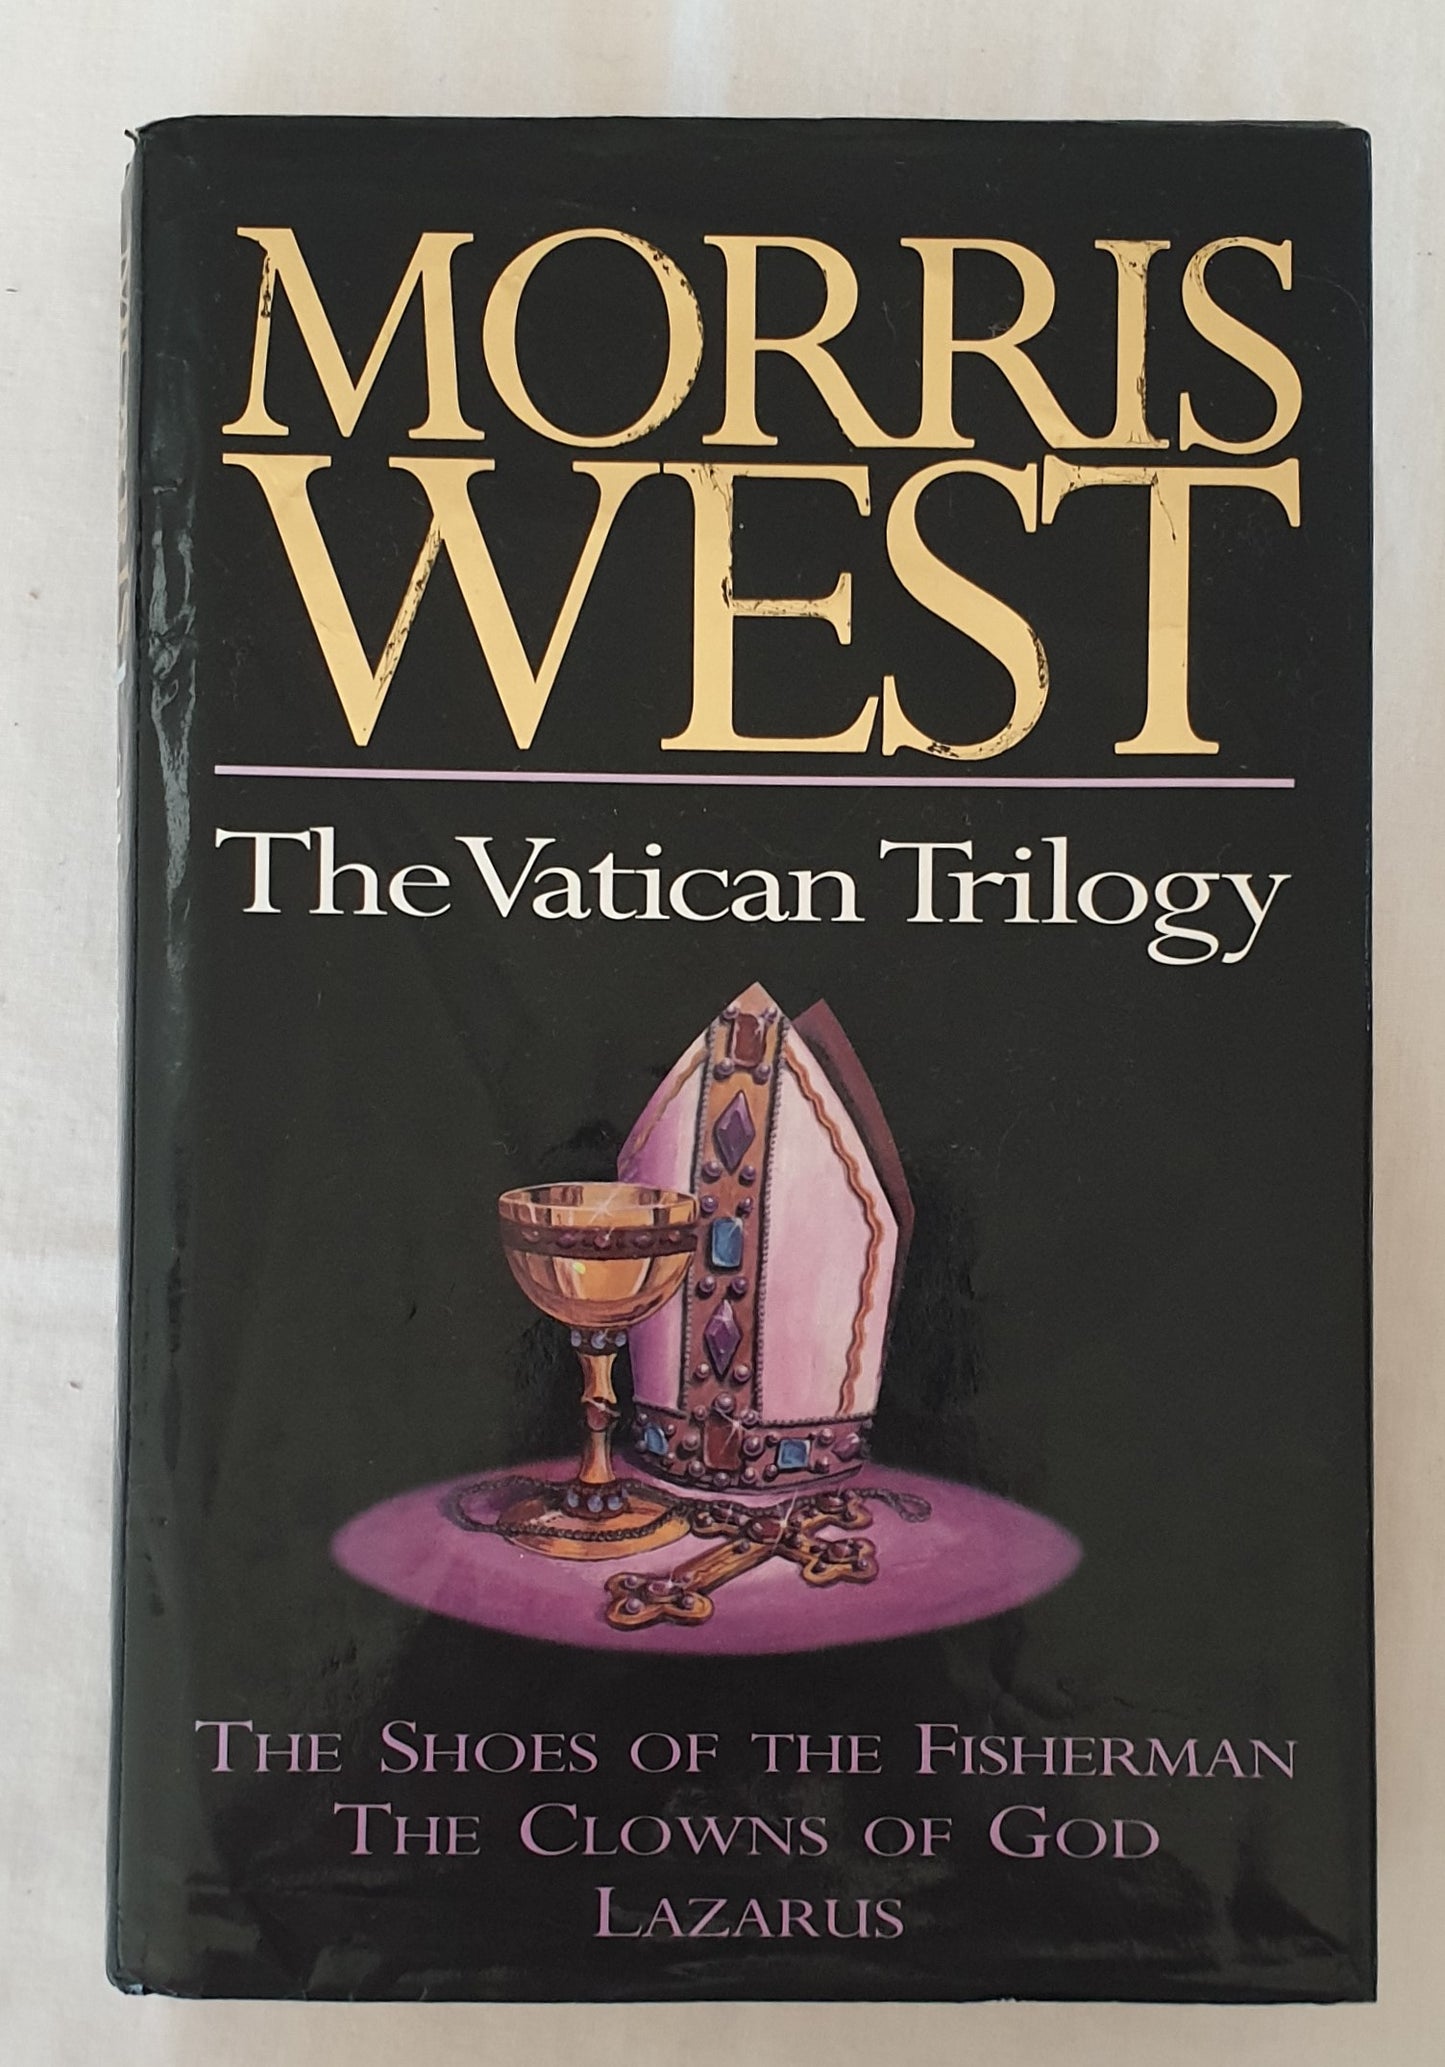 The Vatican Trilogy  The Shoes of the Fisherman The Clowns of God Lazarus  by Morris West